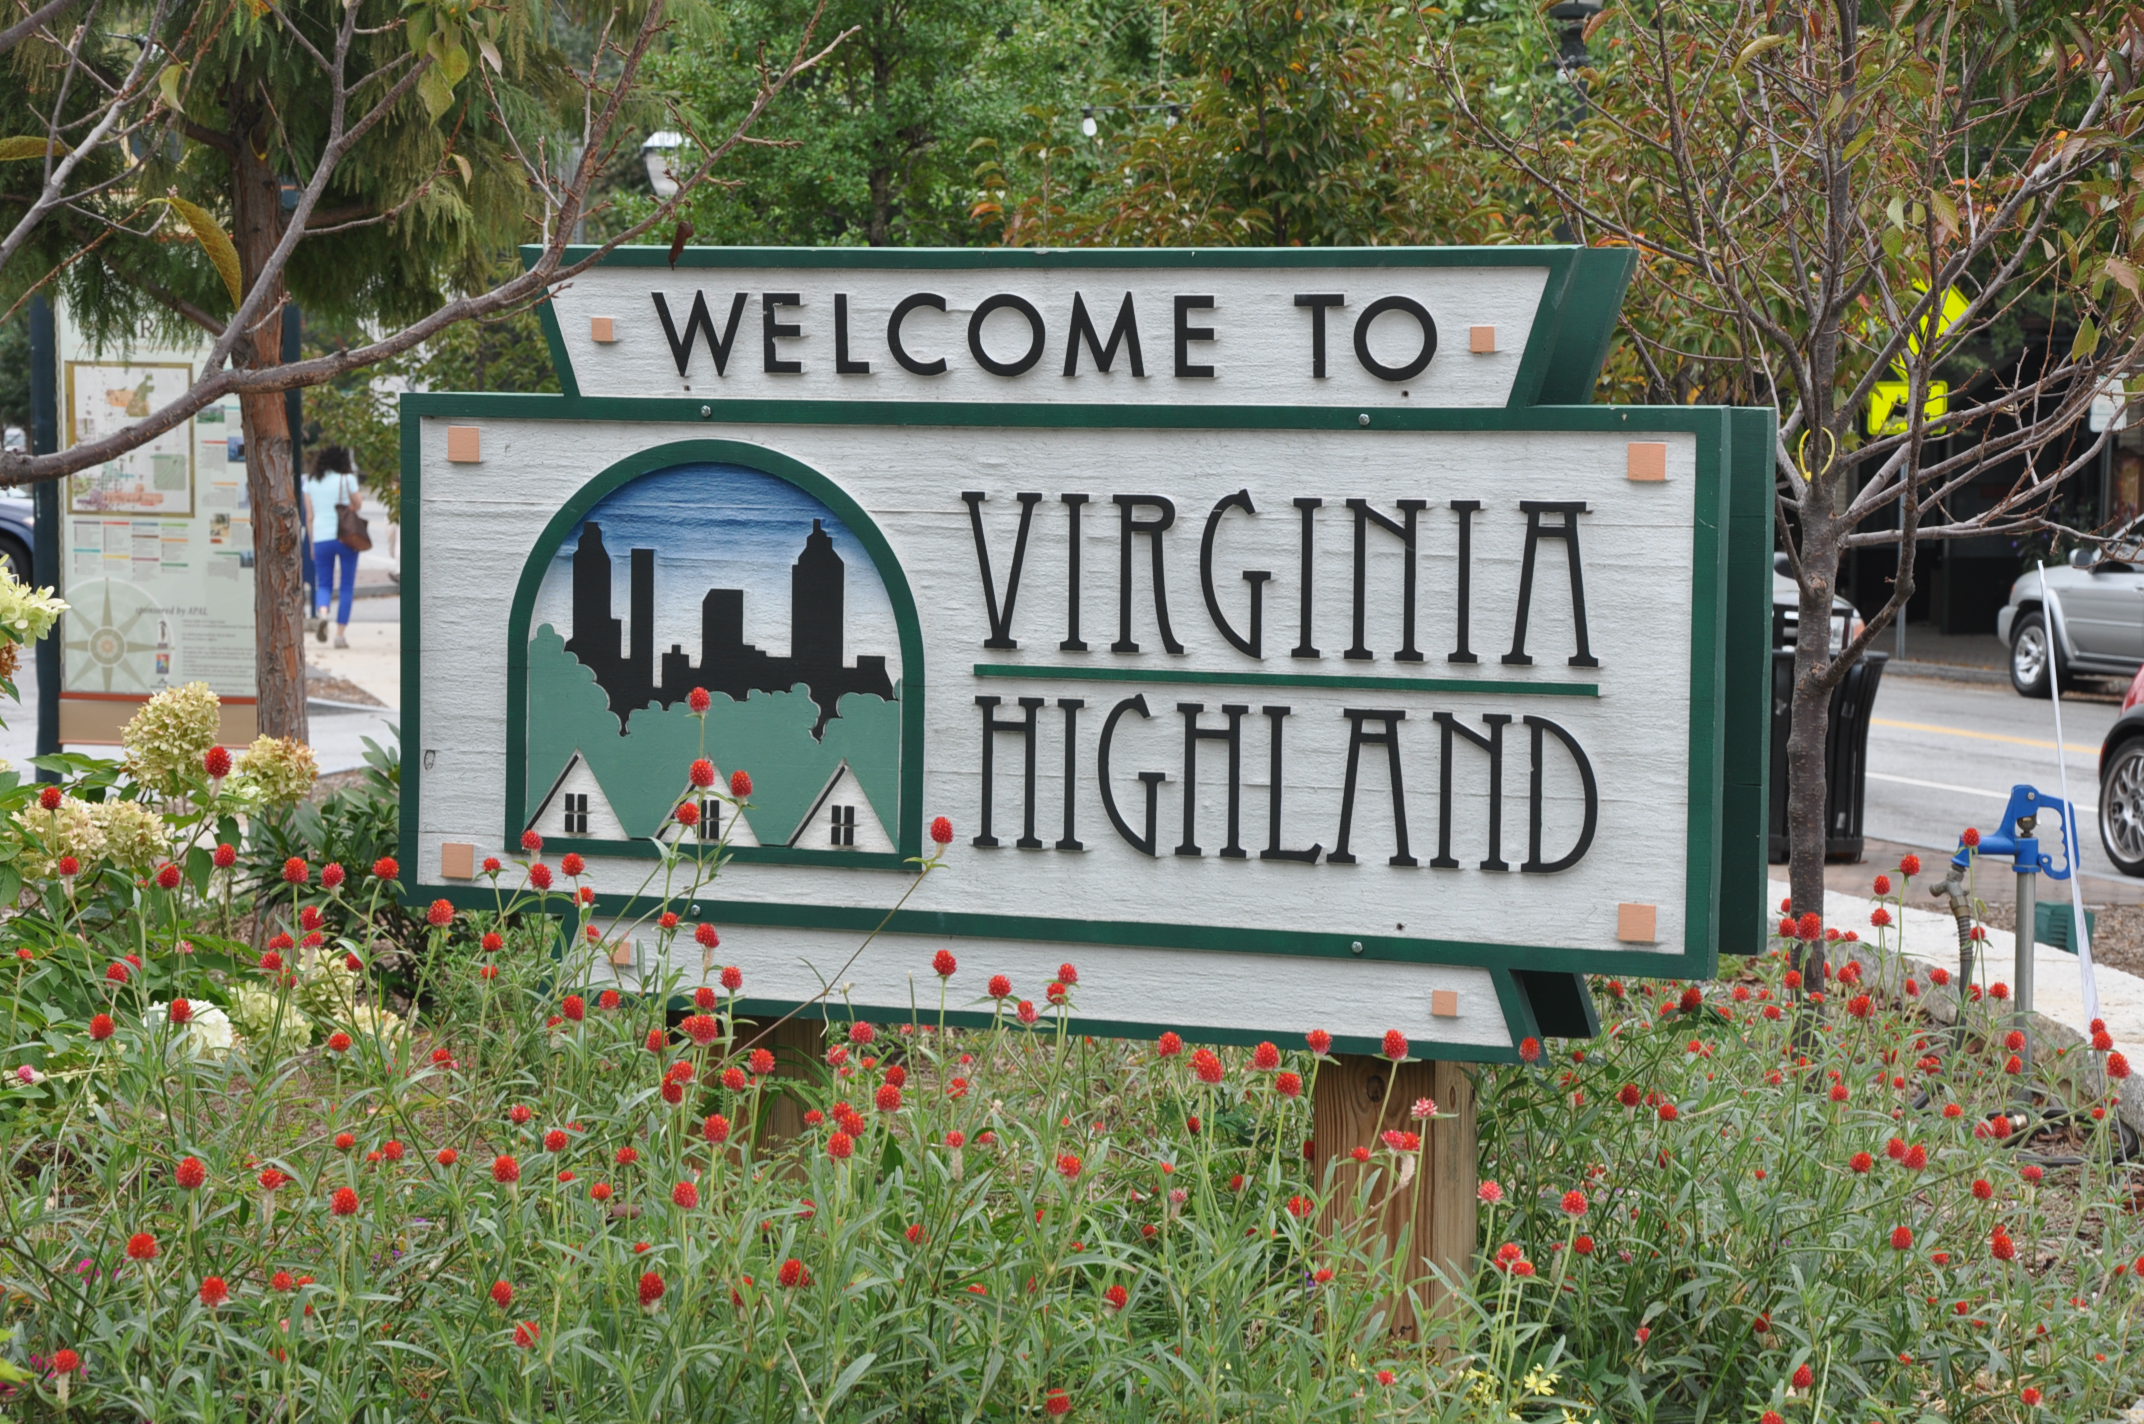 Welcome to Virginia Highlands